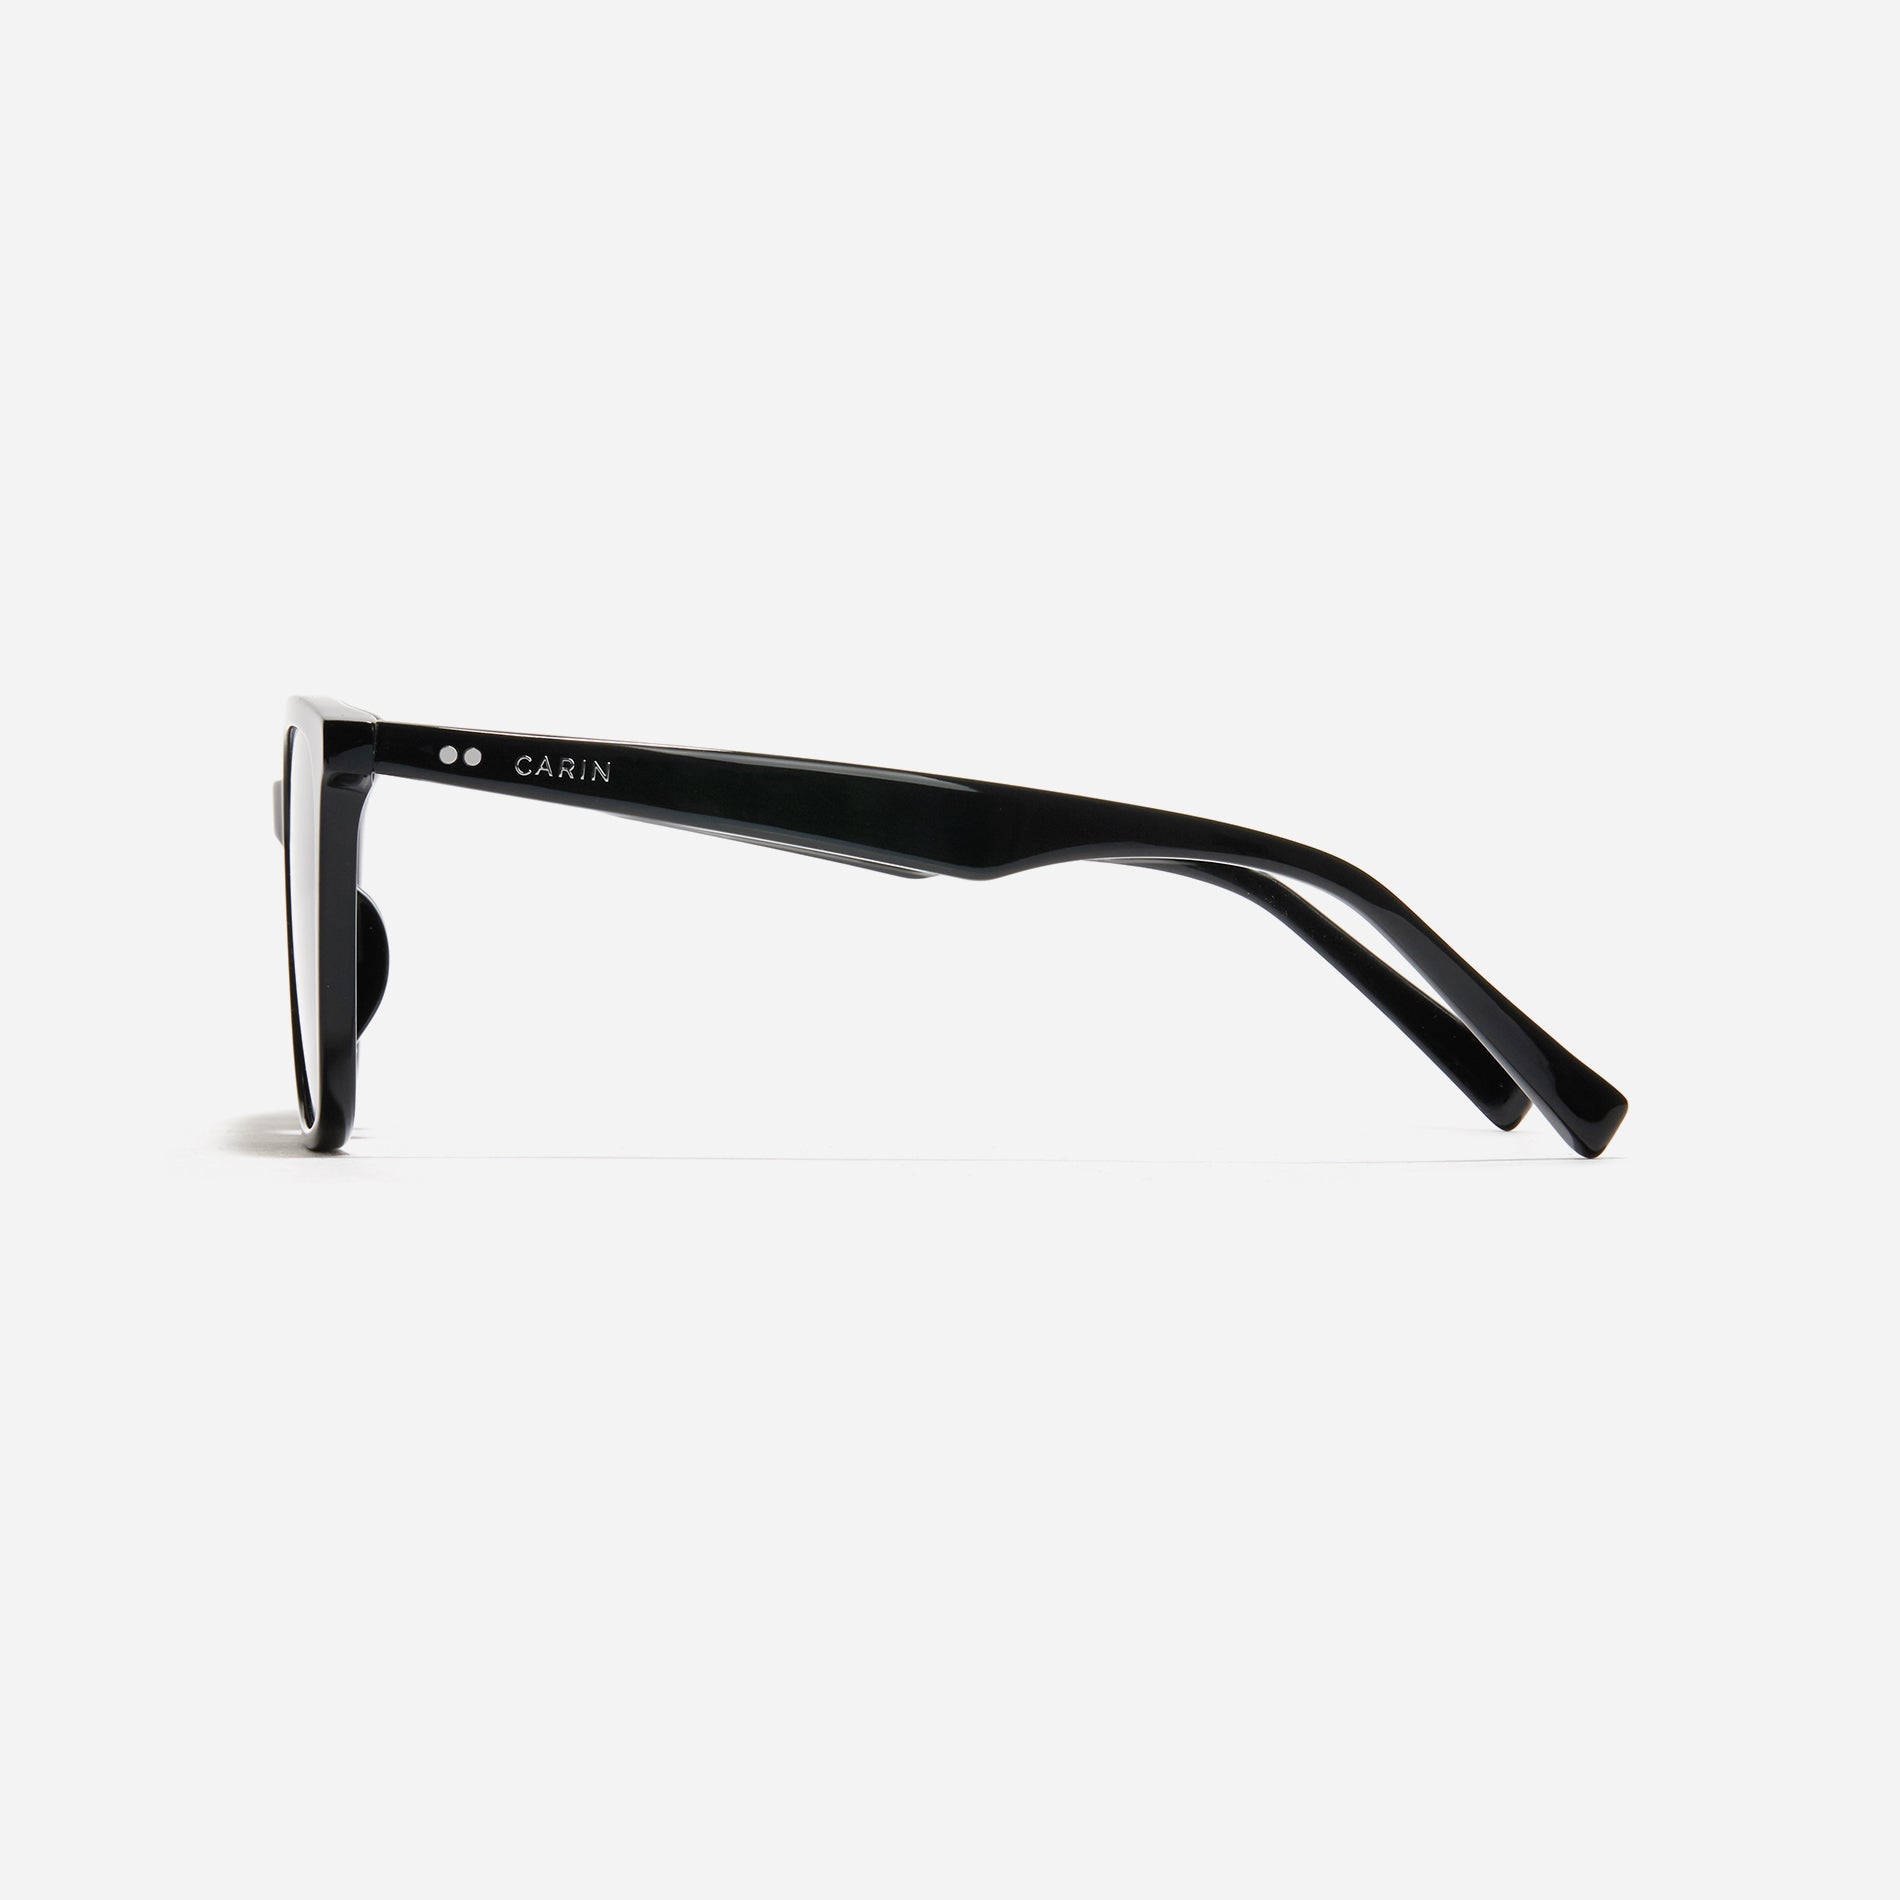 Square-shaped sunglasses with a sleek, straight-edged top front, providing a versatile and neutral style.